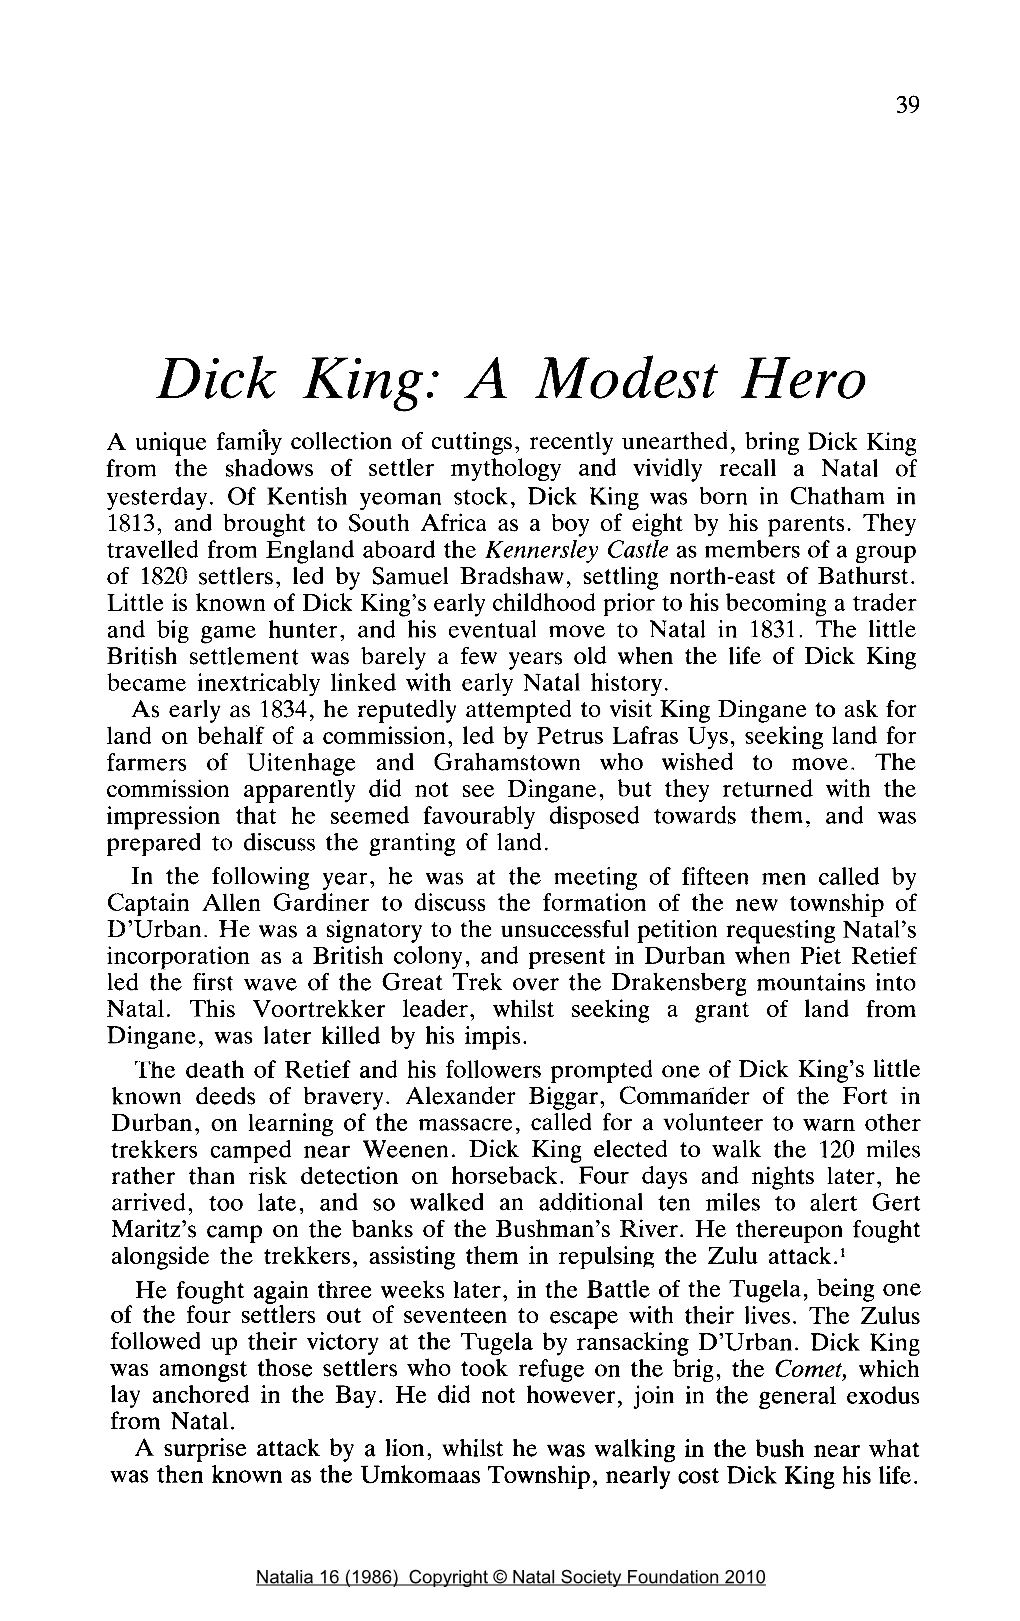 Dick King: a Modest Hero